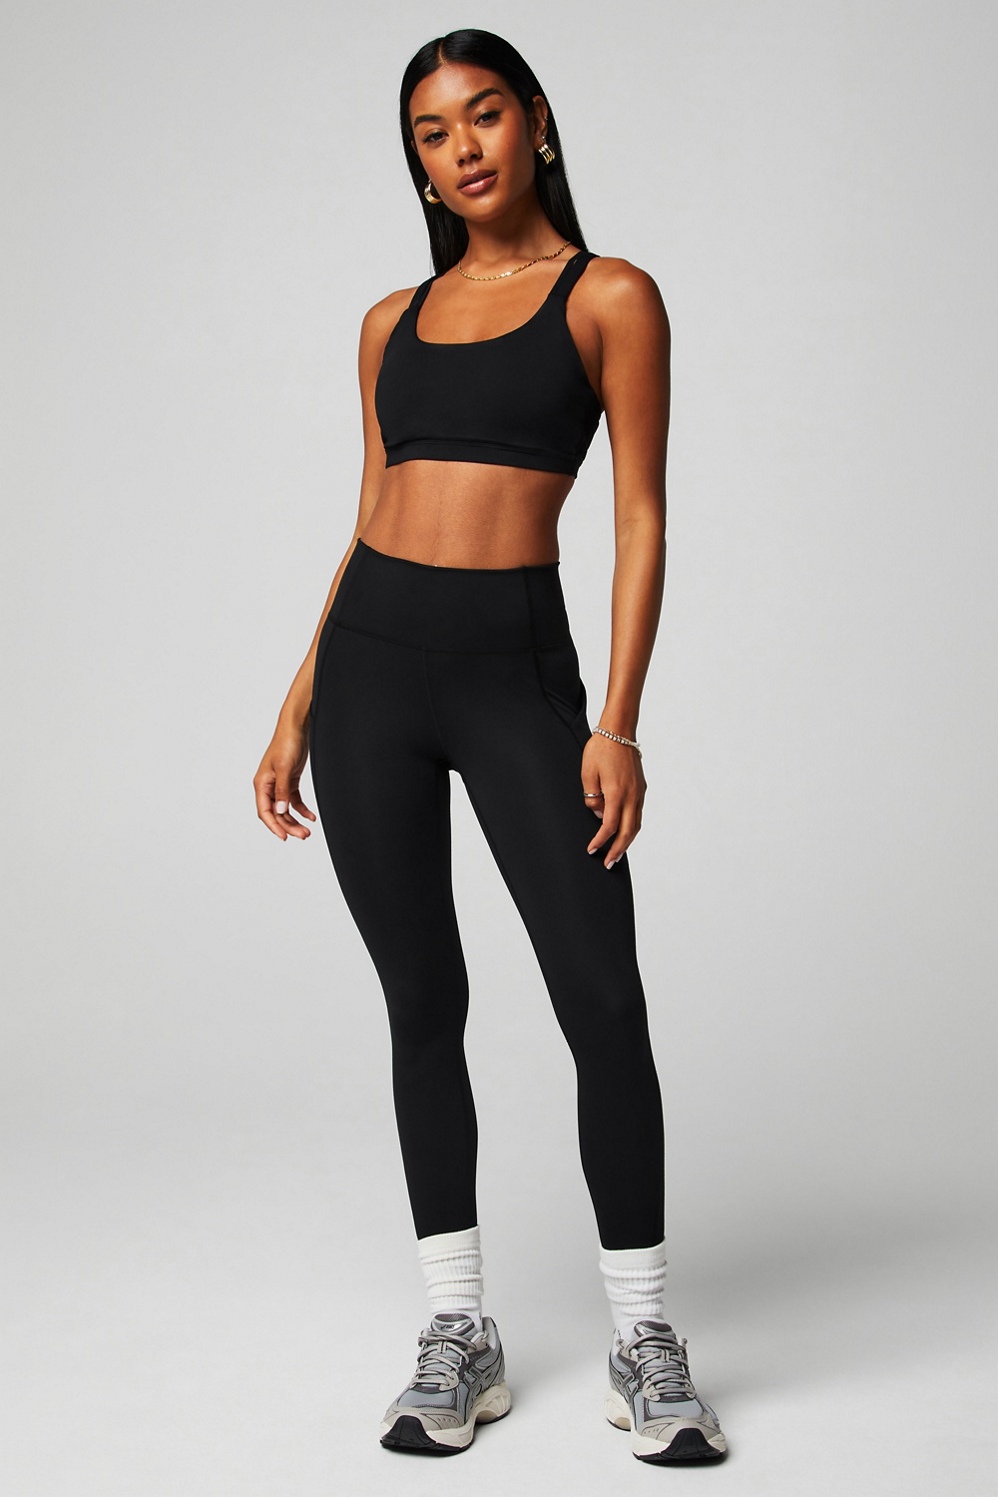 Fabletics Women's Oasis PureLuxe High-Waisted Legging, Workout, Yoga,  Running, Athletic, Light Compression, Buttery Soft, Black, 2X : Buy Online  at Best Price in KSA - Souq is now : Fashion